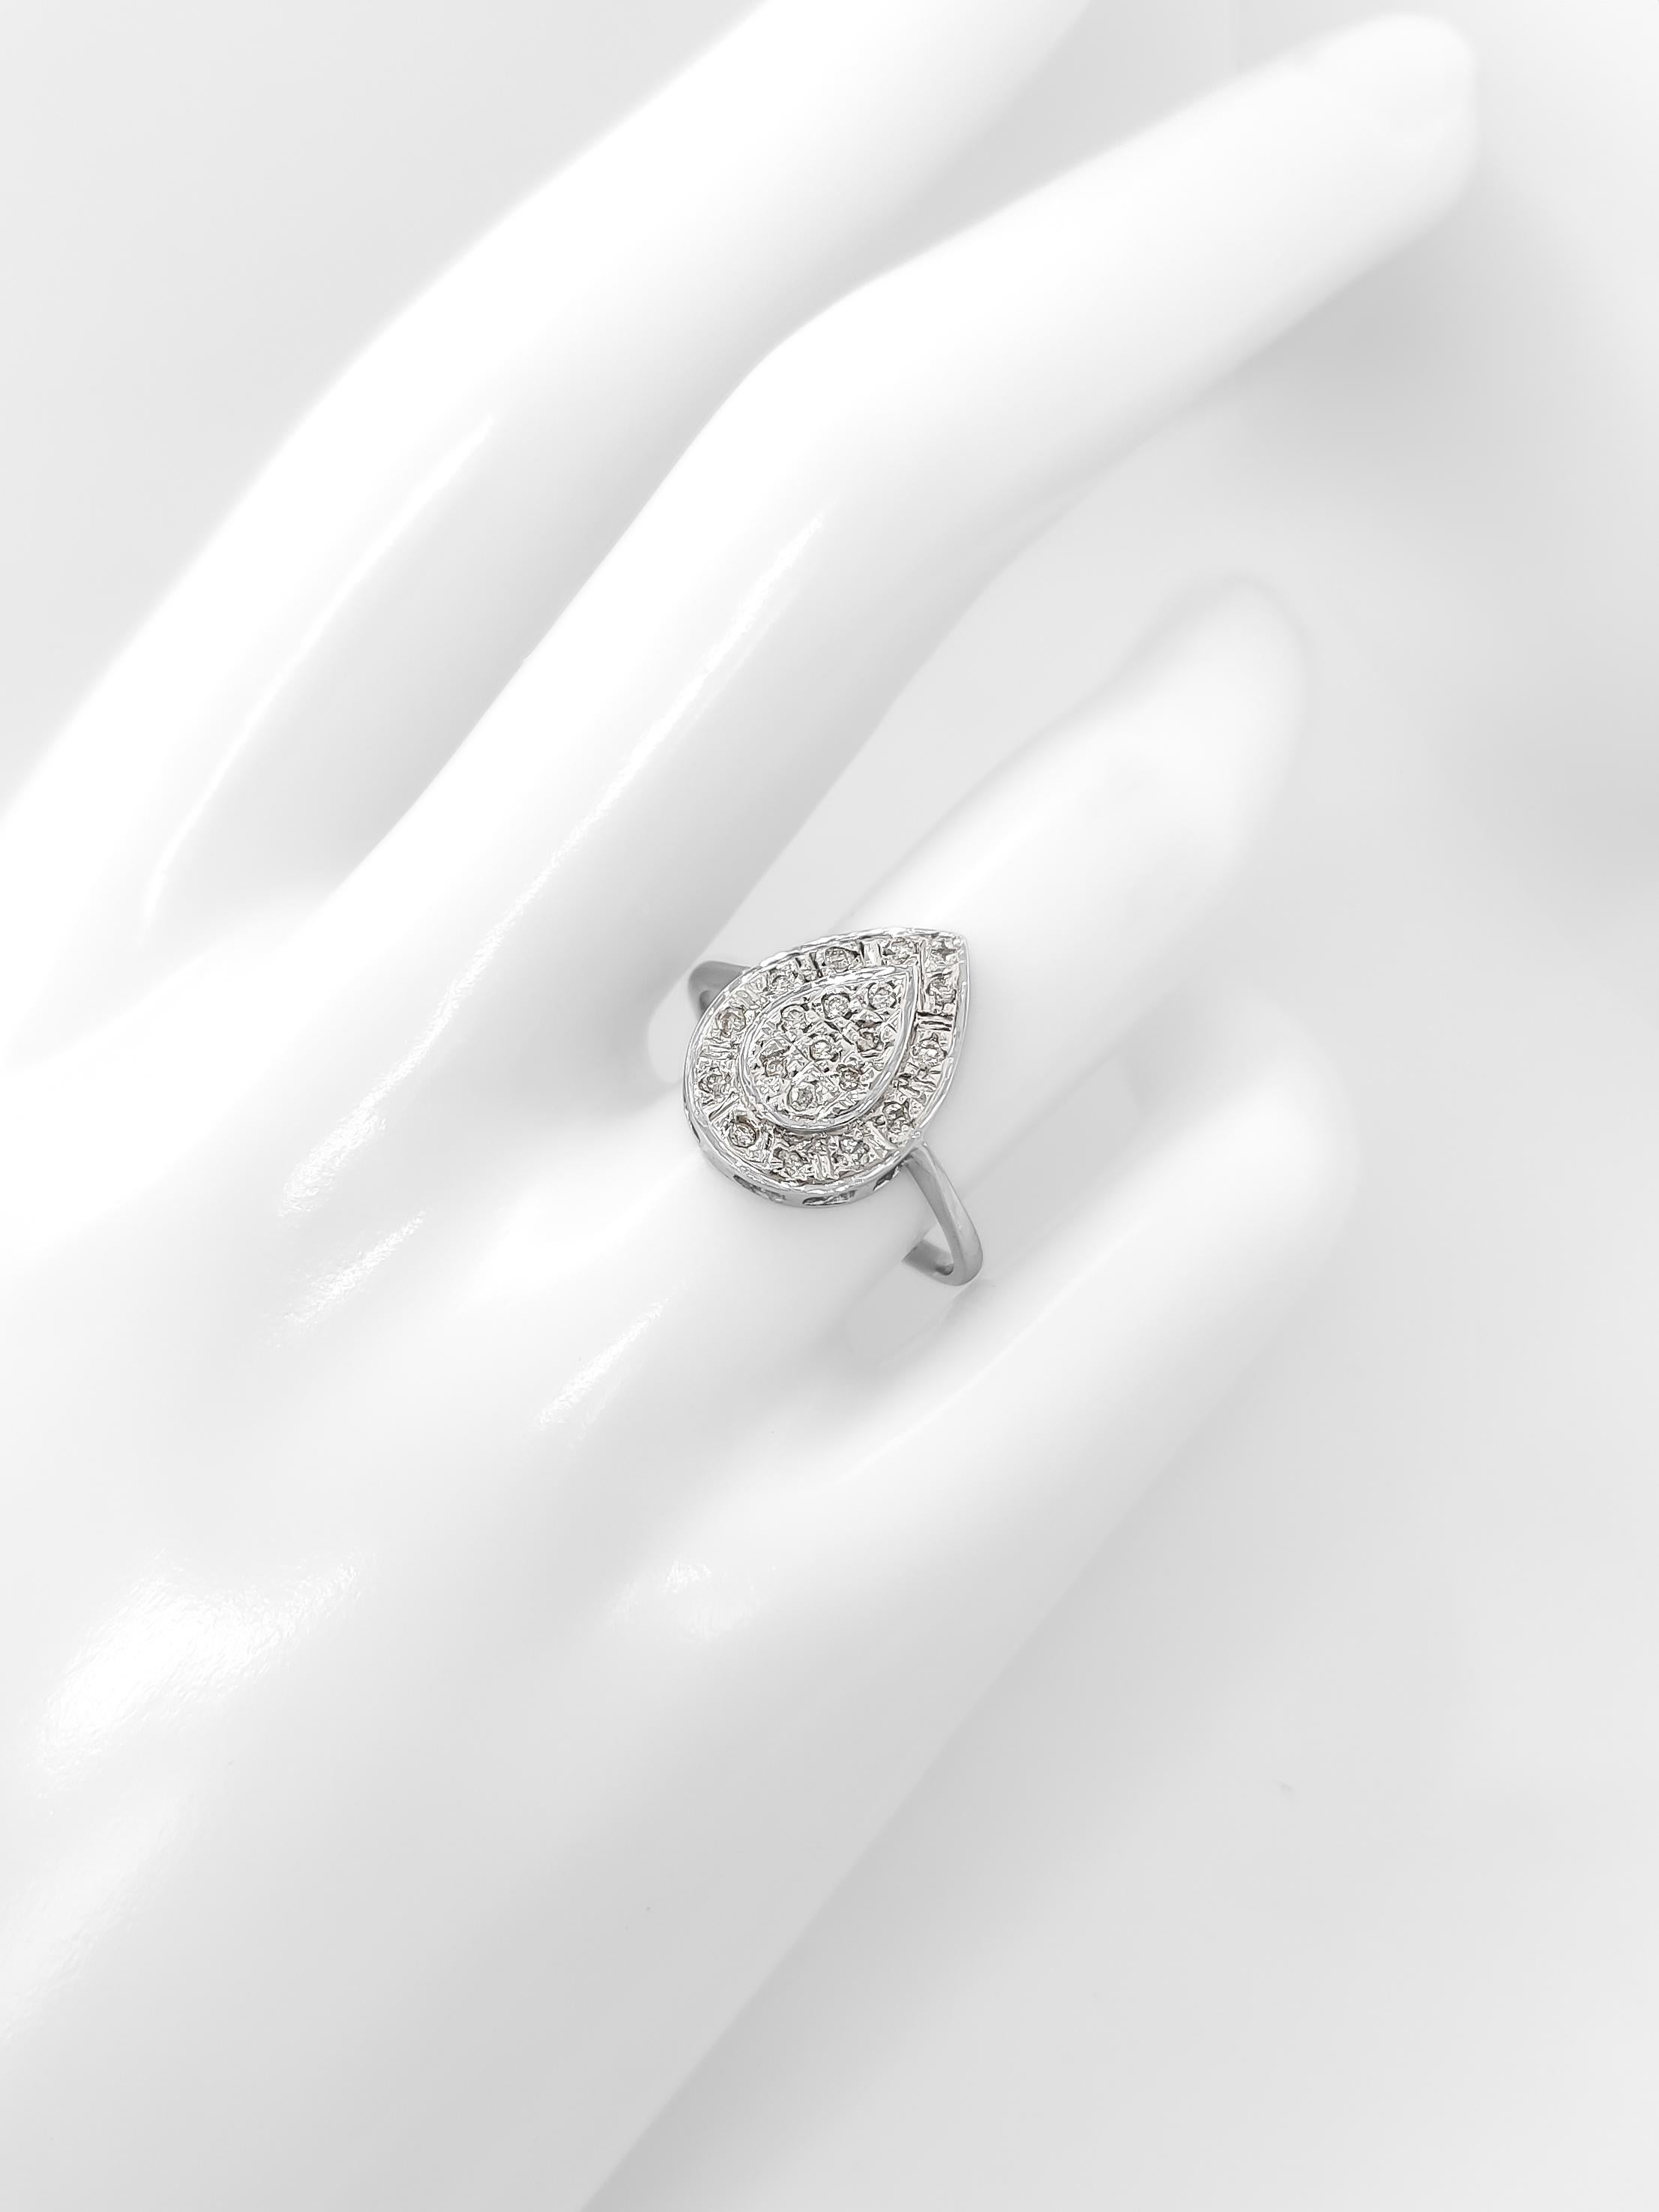 FOR US CUSTOMER NO VAT!

centerpiece of the ring is adorned with 20 diamonds, totaling 0.25 carats in weight. These diamonds exhibit a range of colors from F to I, showcasing a beautiful spectrum of diamond whiteness. In terms of clarity, they fall